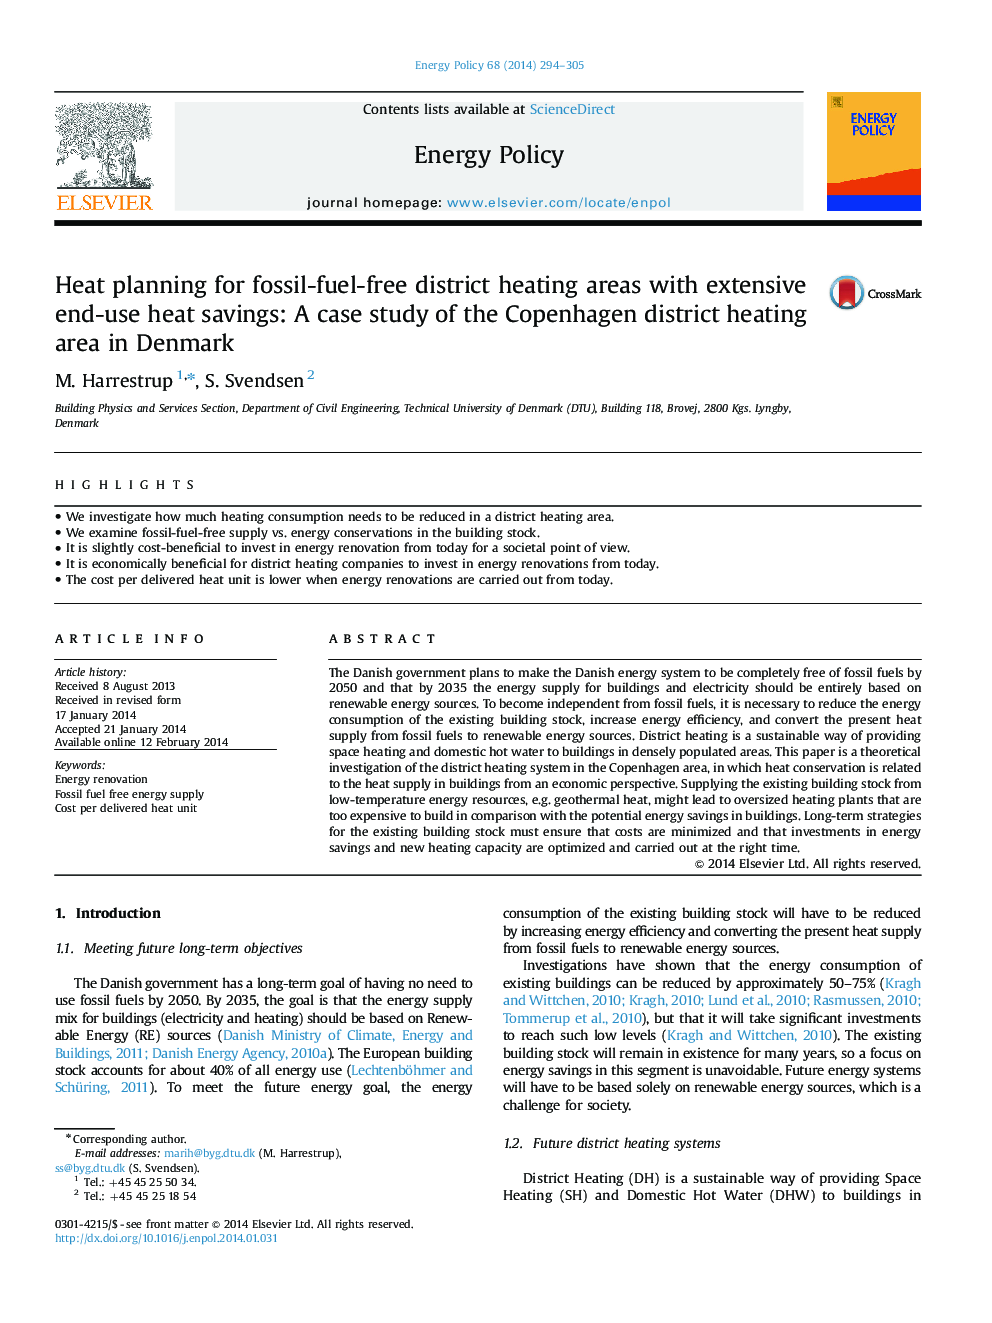 Heat planning for fossil-fuel-free district heating areas with extensive end-use heat savings: A case study of the Copenhagen district heating area in Denmark